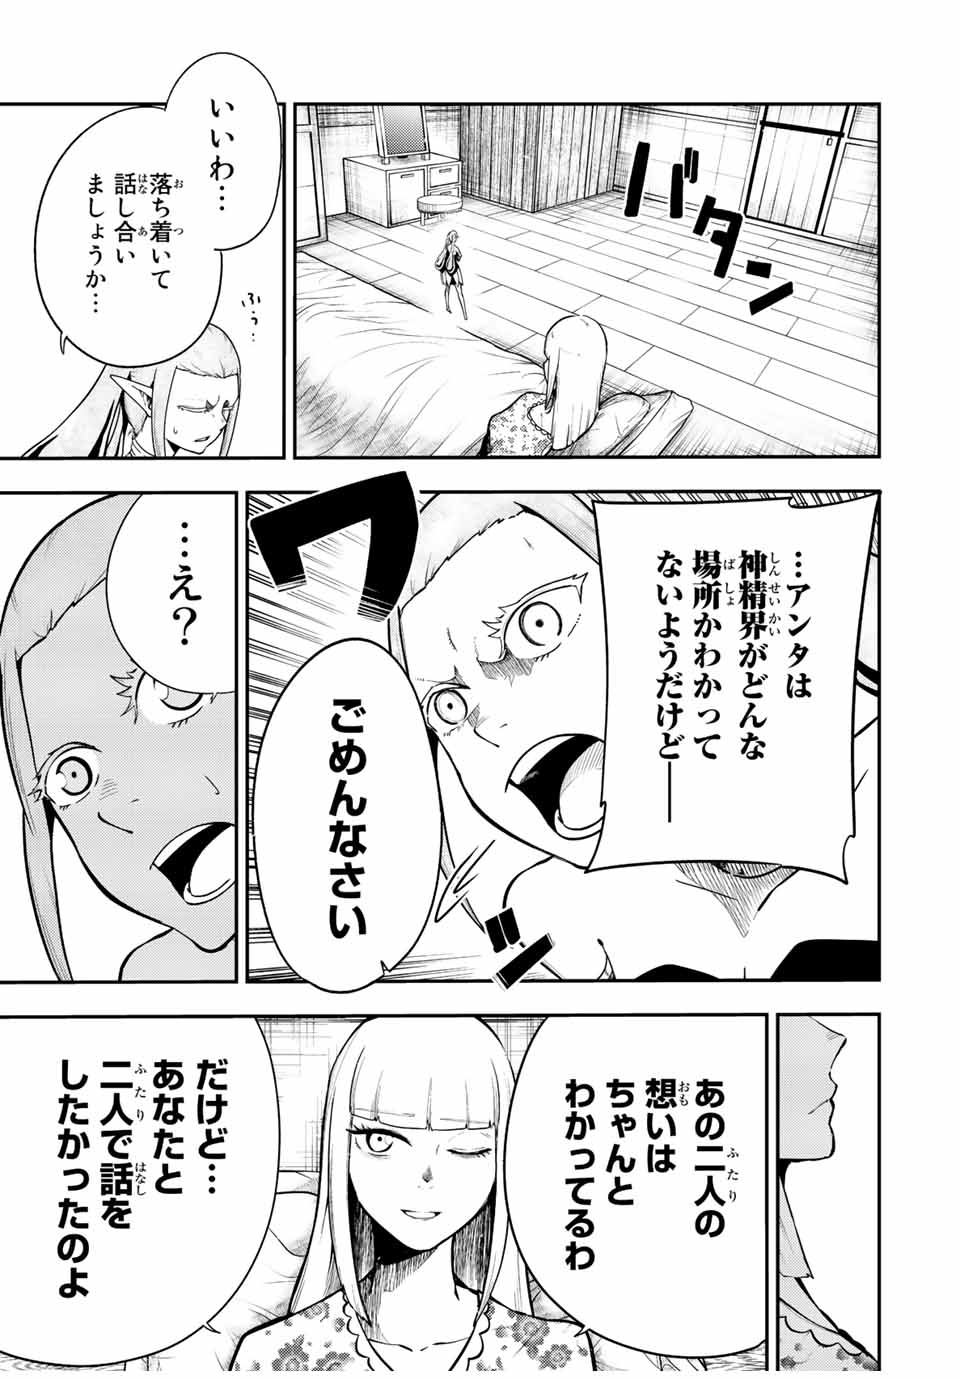 the strongest former prince-; 奴隷転生 ～その奴隷、最強の元王子につき～ 第78話 - Page 13